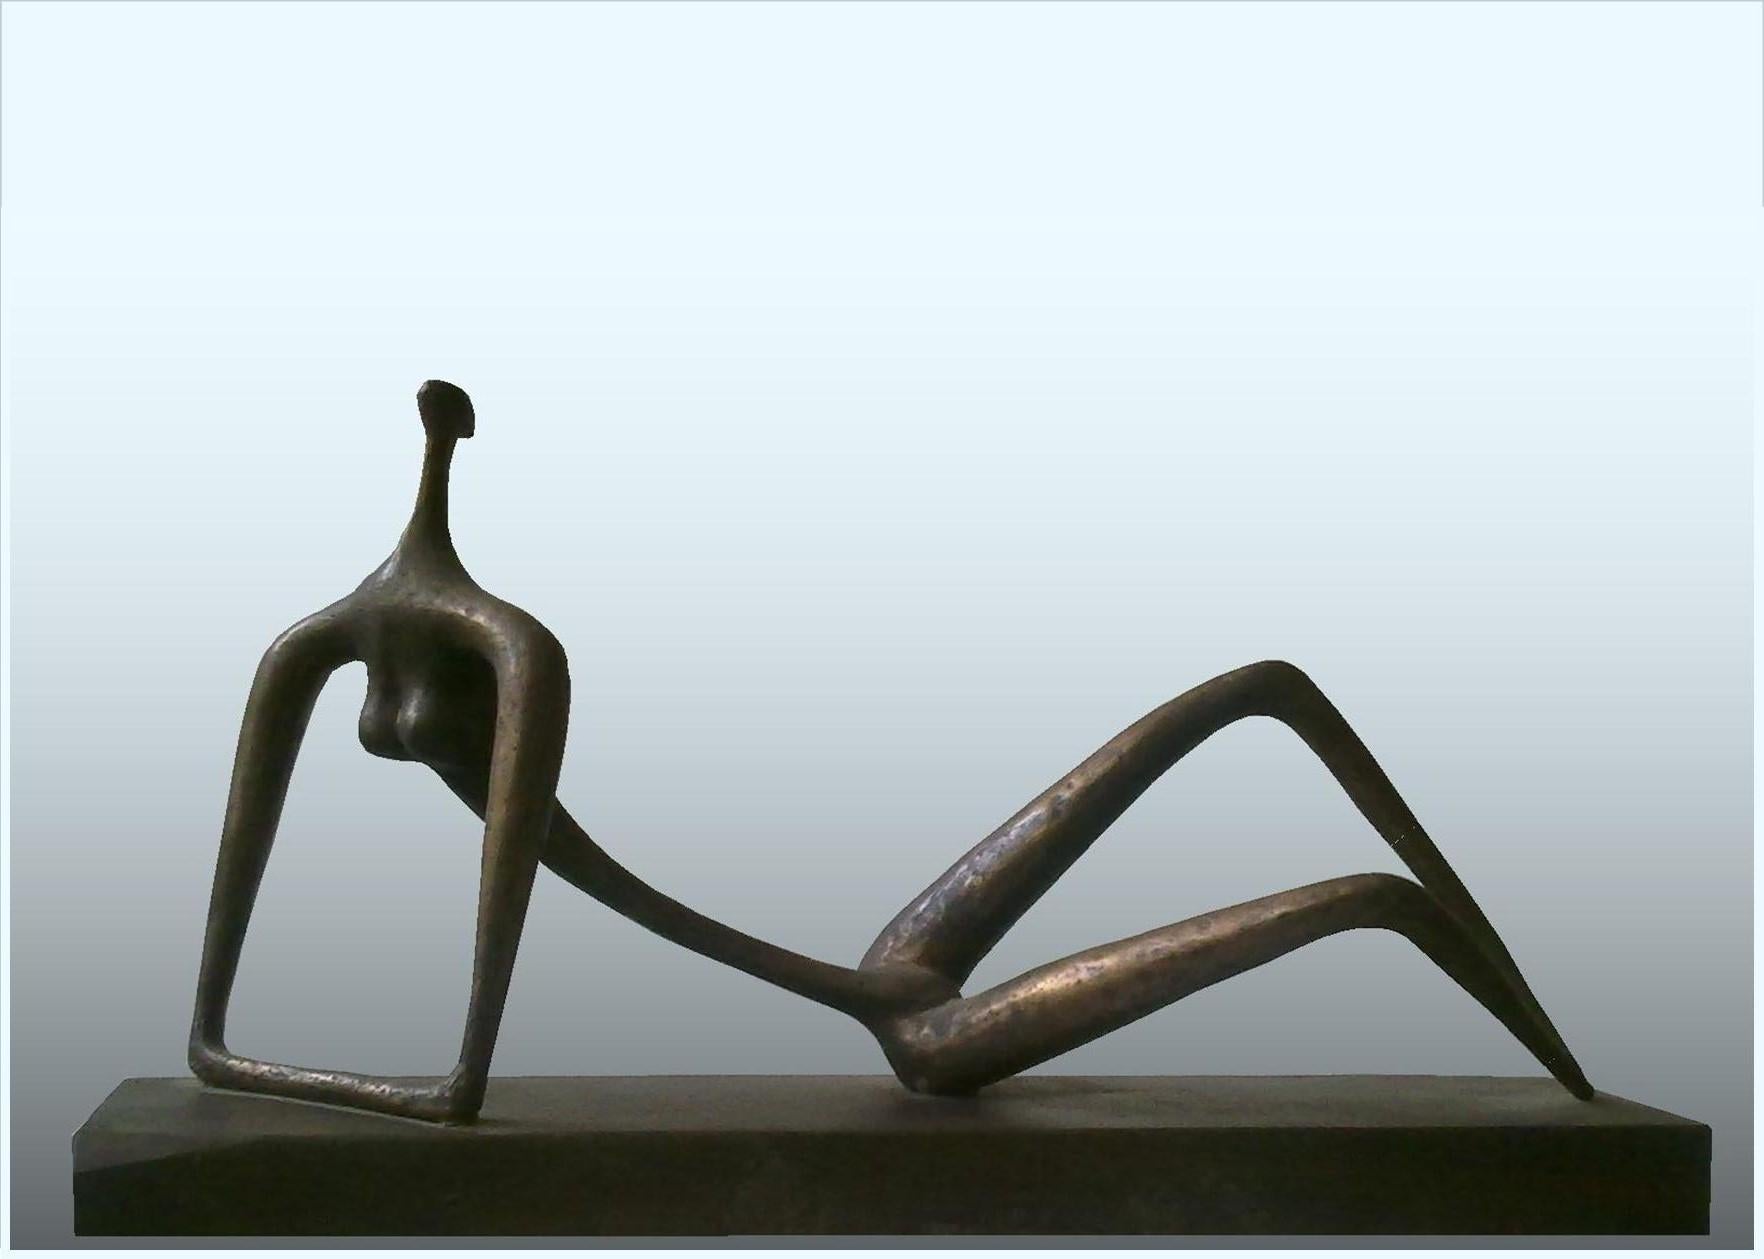 Bronze & wood sculpture 

Rezo Khasia is a Georgian artist born in 1947 who lives and works in Tbilisi, Georgia. The sculptures performed by him are generalized and minimalist. He Uses as a working material the bronze, wood, stone, metal and general